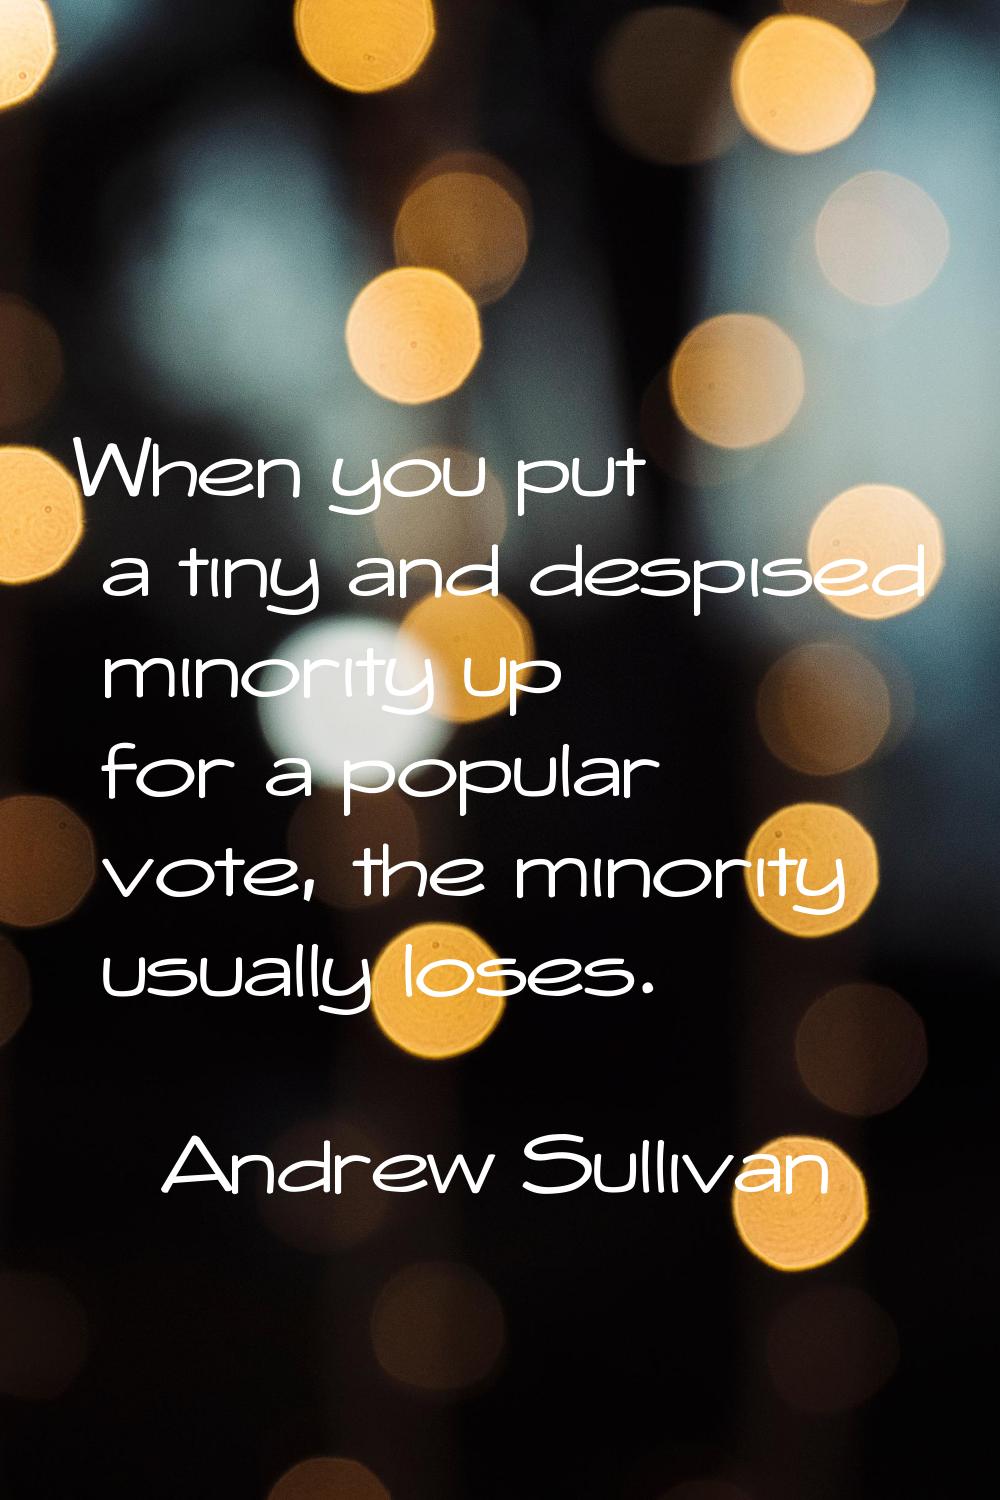 When you put a tiny and despised minority up for a popular vote, the minority usually loses.